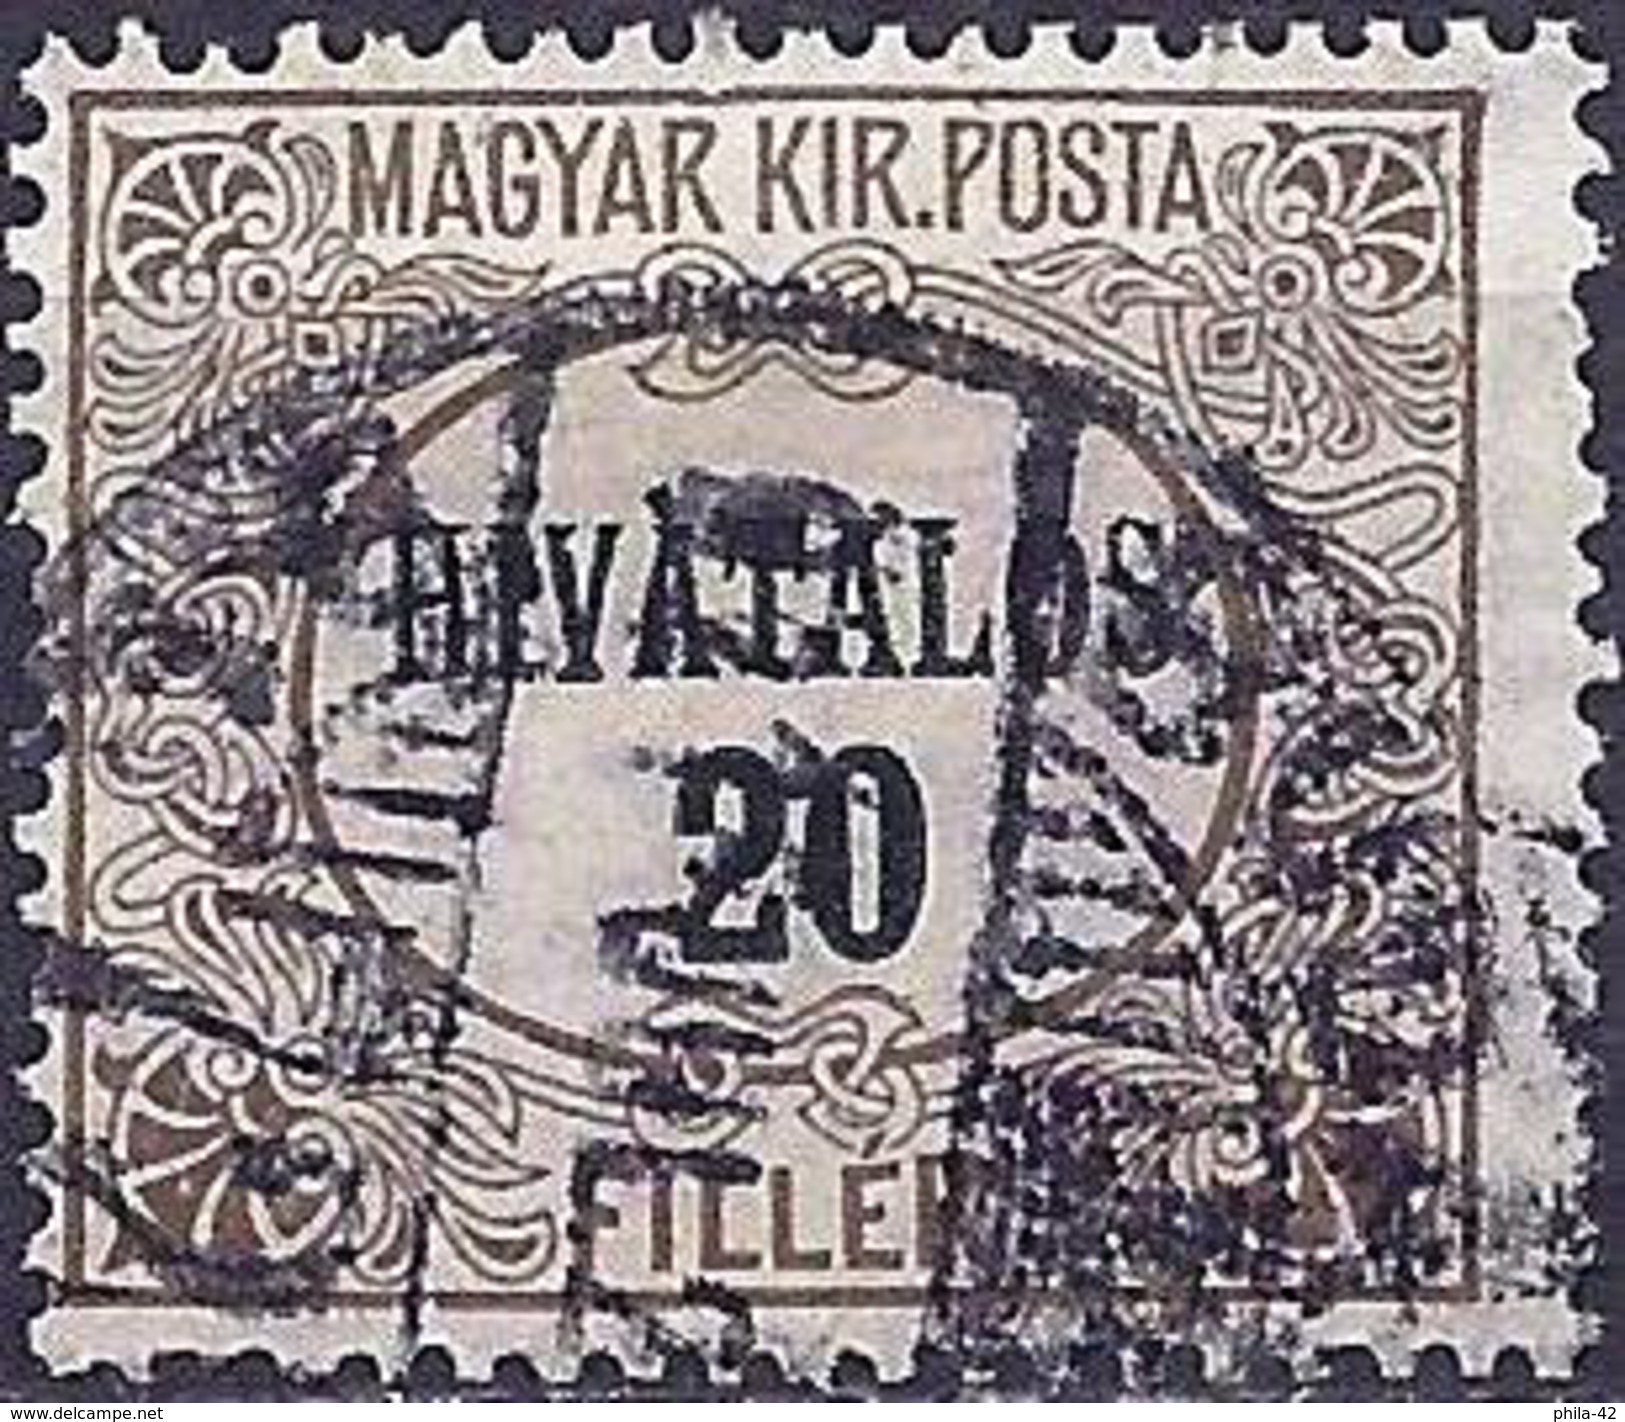 Hungary 1921 - Official Stamp ( Mi D2 - YT S2 ) - Officials